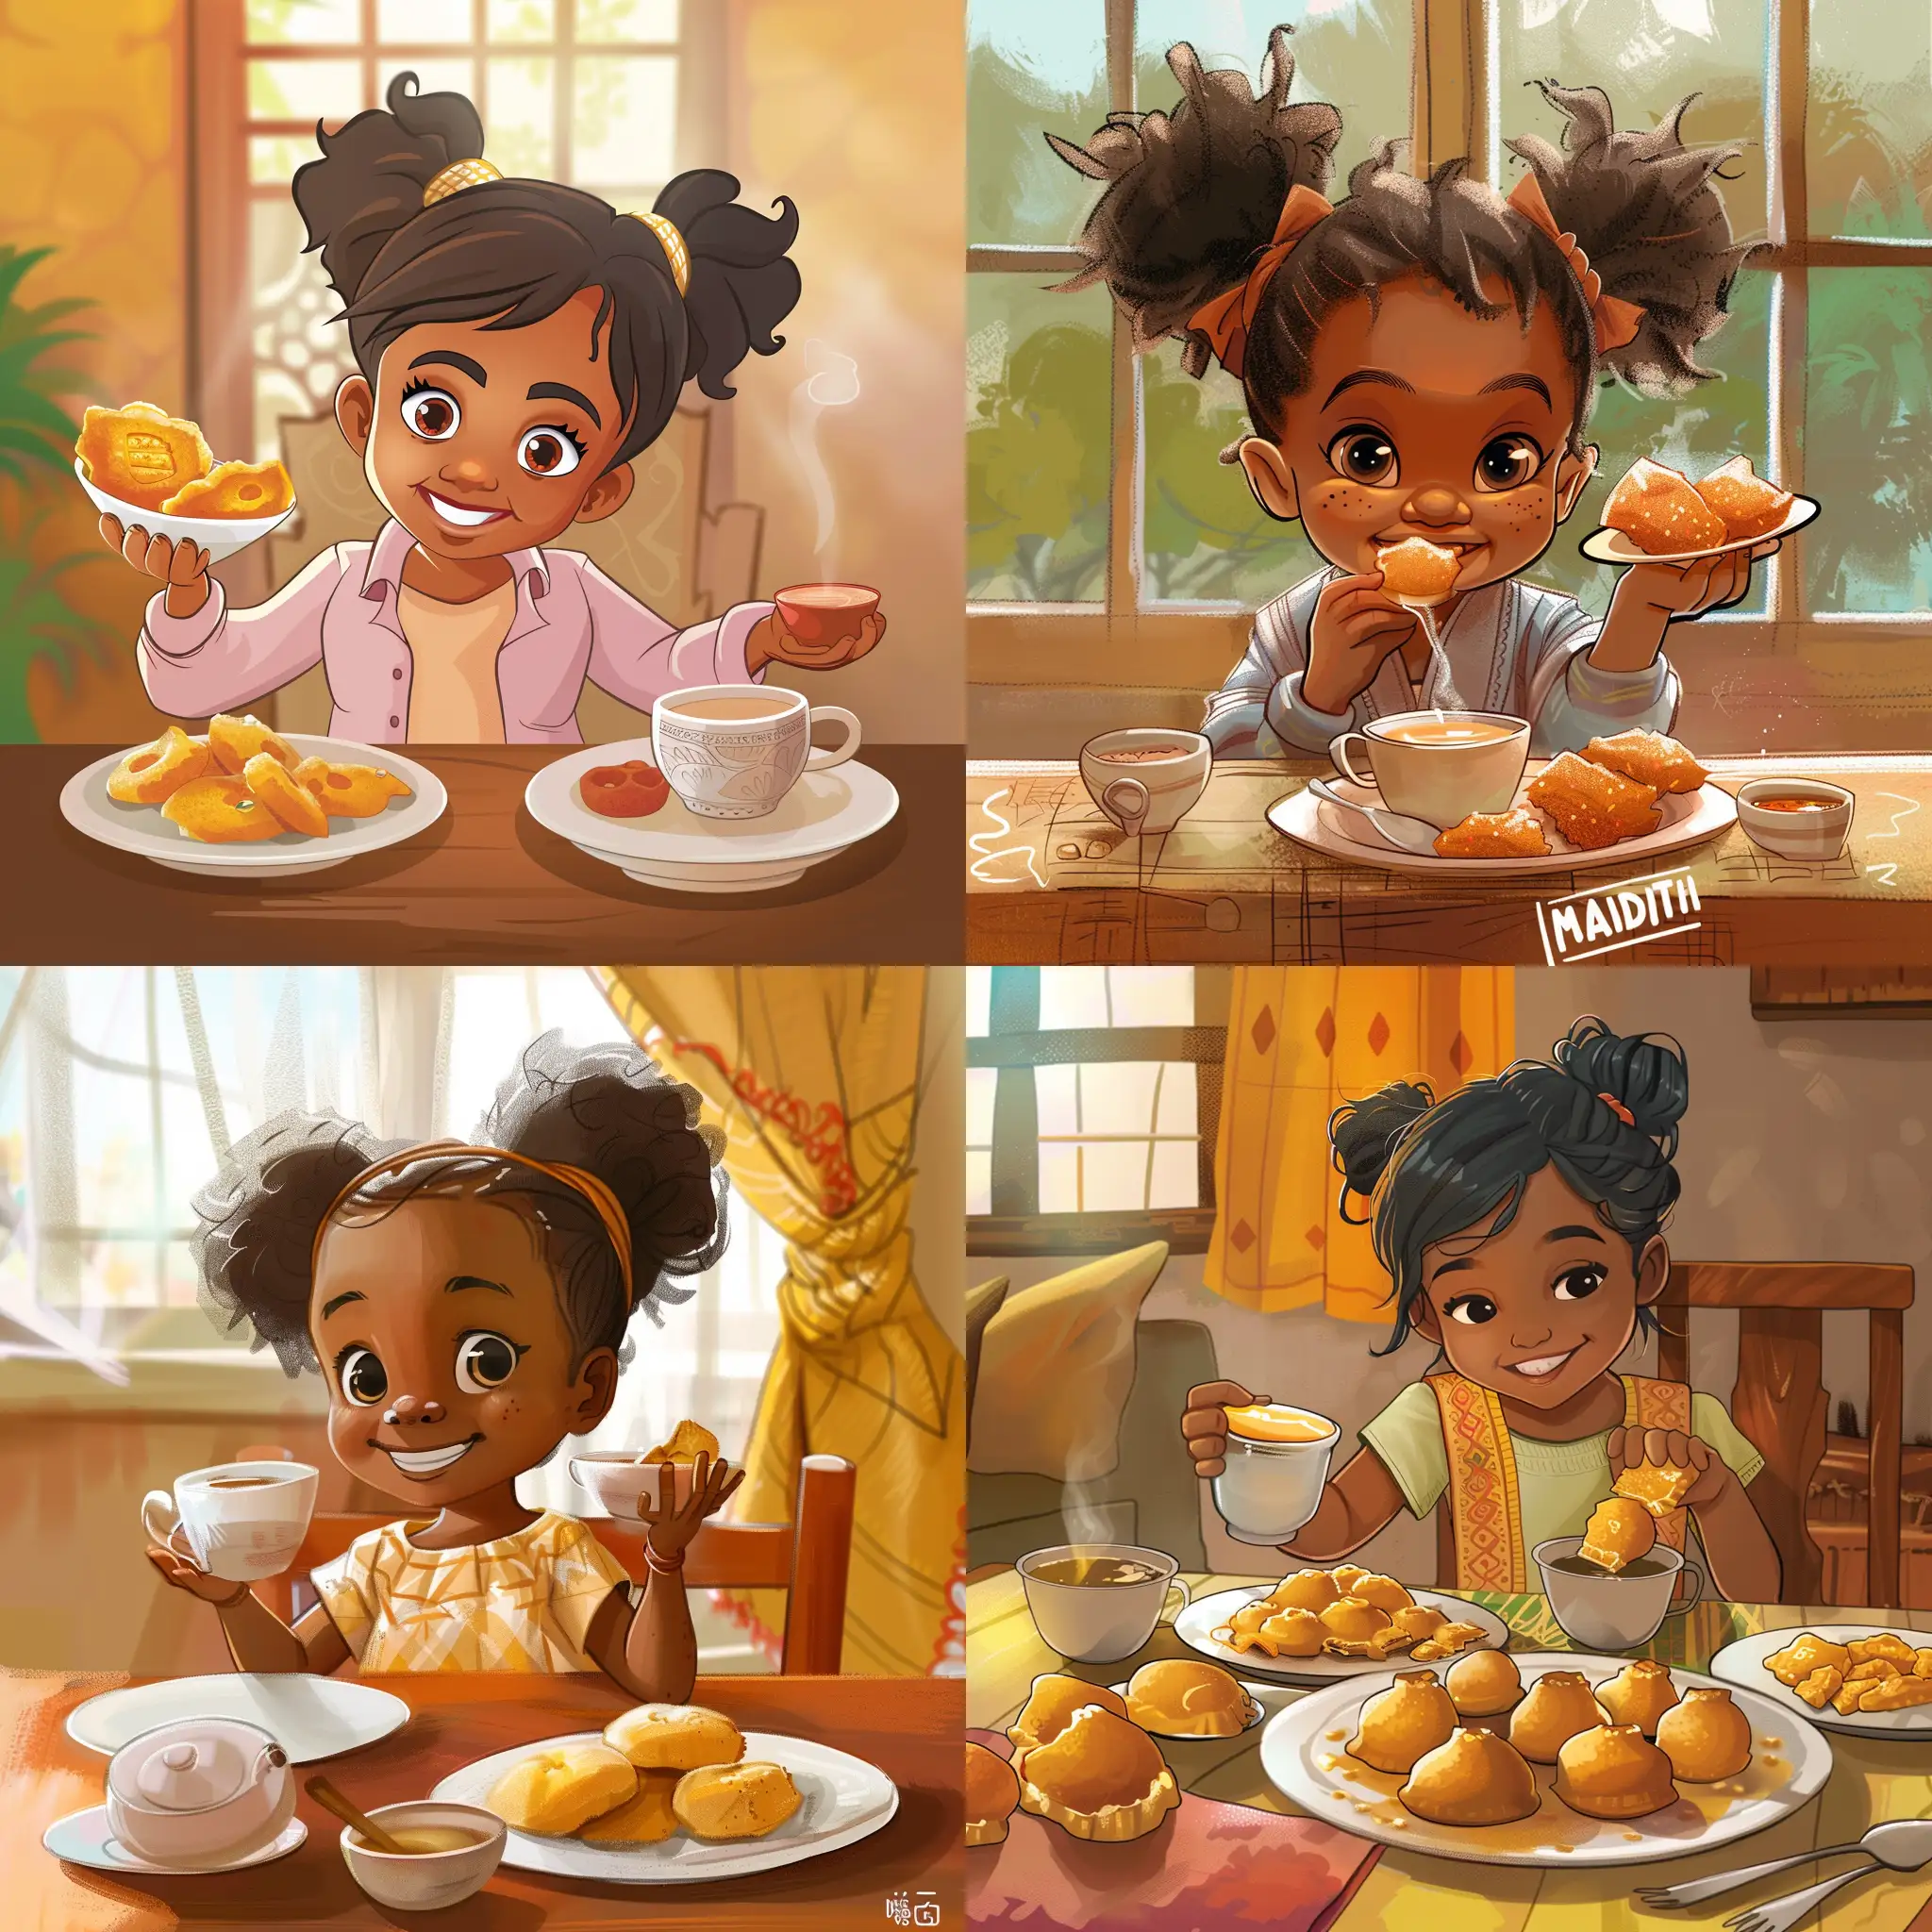 a bright and curious little girl, 10 years old, having a hearty breakfast of mandazi and chai, setting in Kenya, cartoon